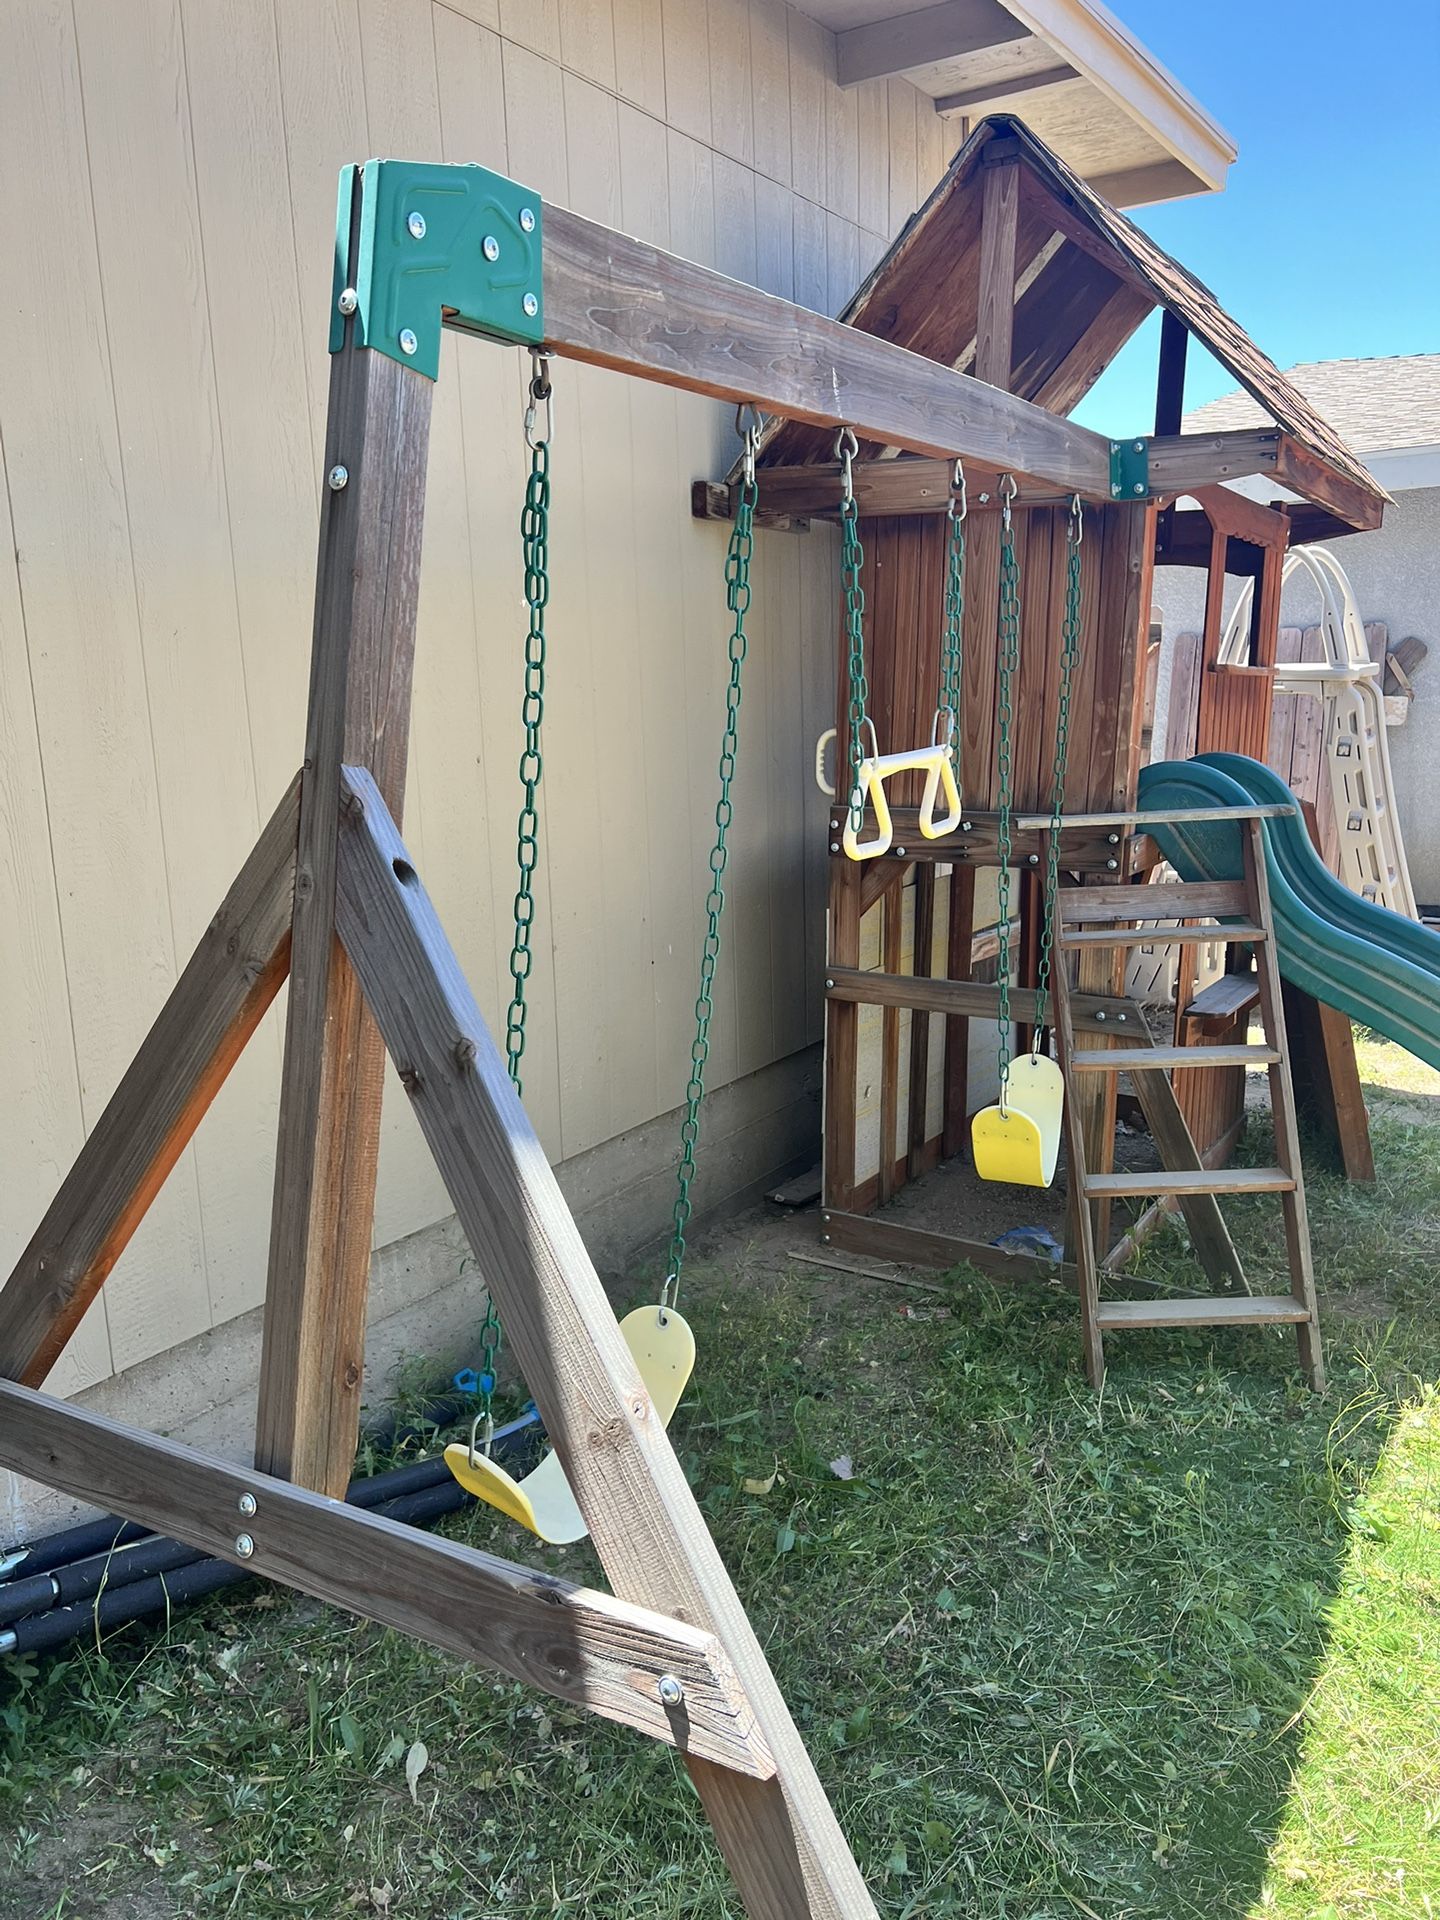 Swing set Clubhouse 